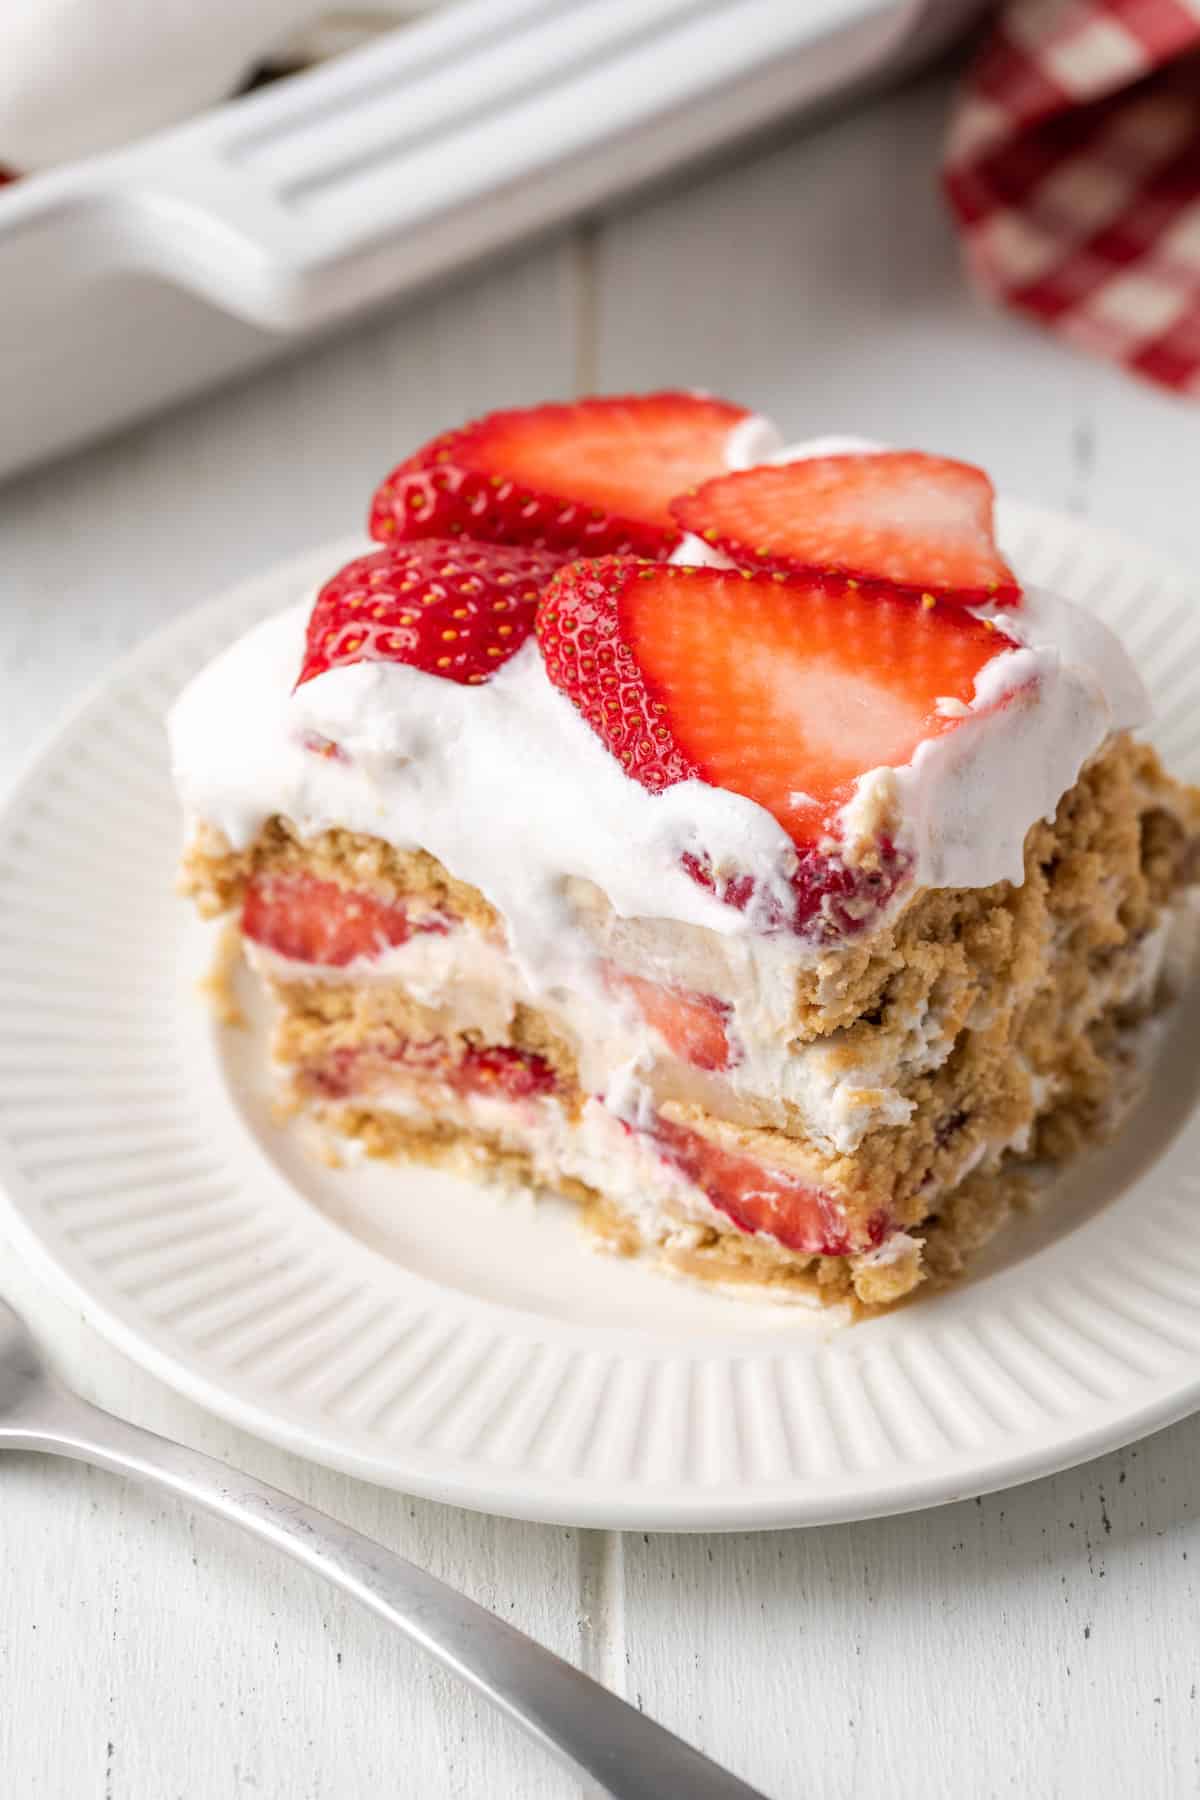 A slice of gluten-free strawberry icebox cake on a white plate.